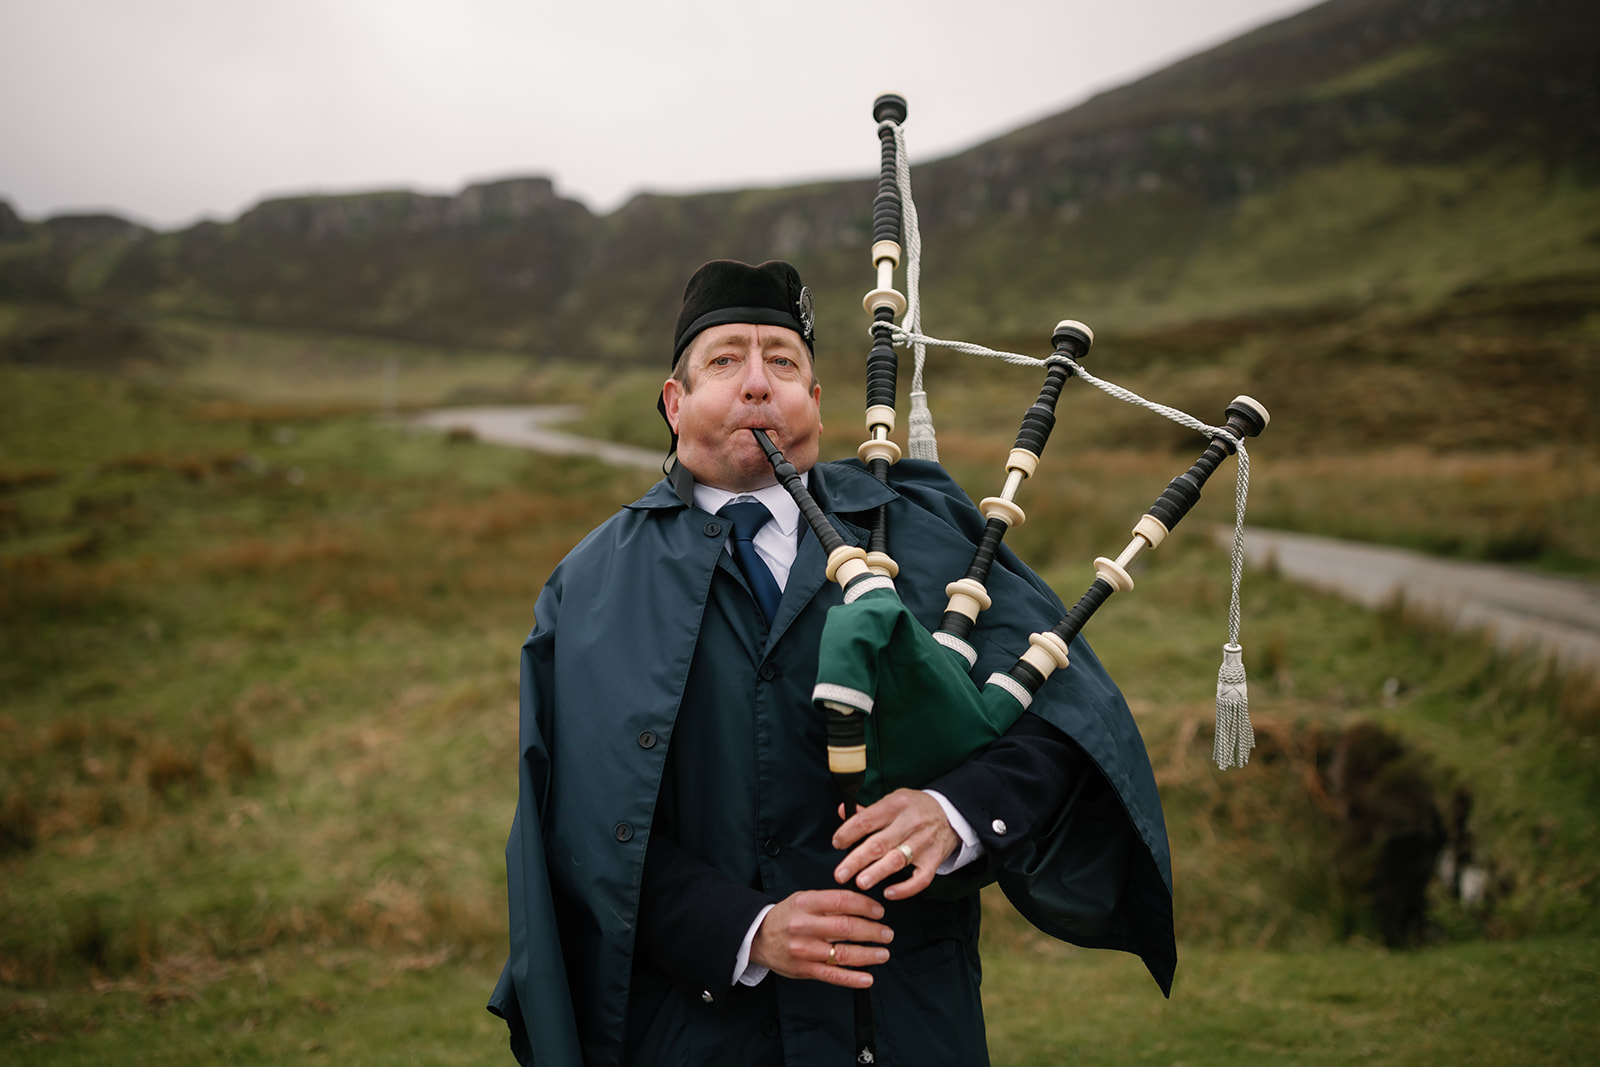 The Piper leads the way, setting a melodic tone for Becca and Nick's journey into marital bliss in the heart of Scotland